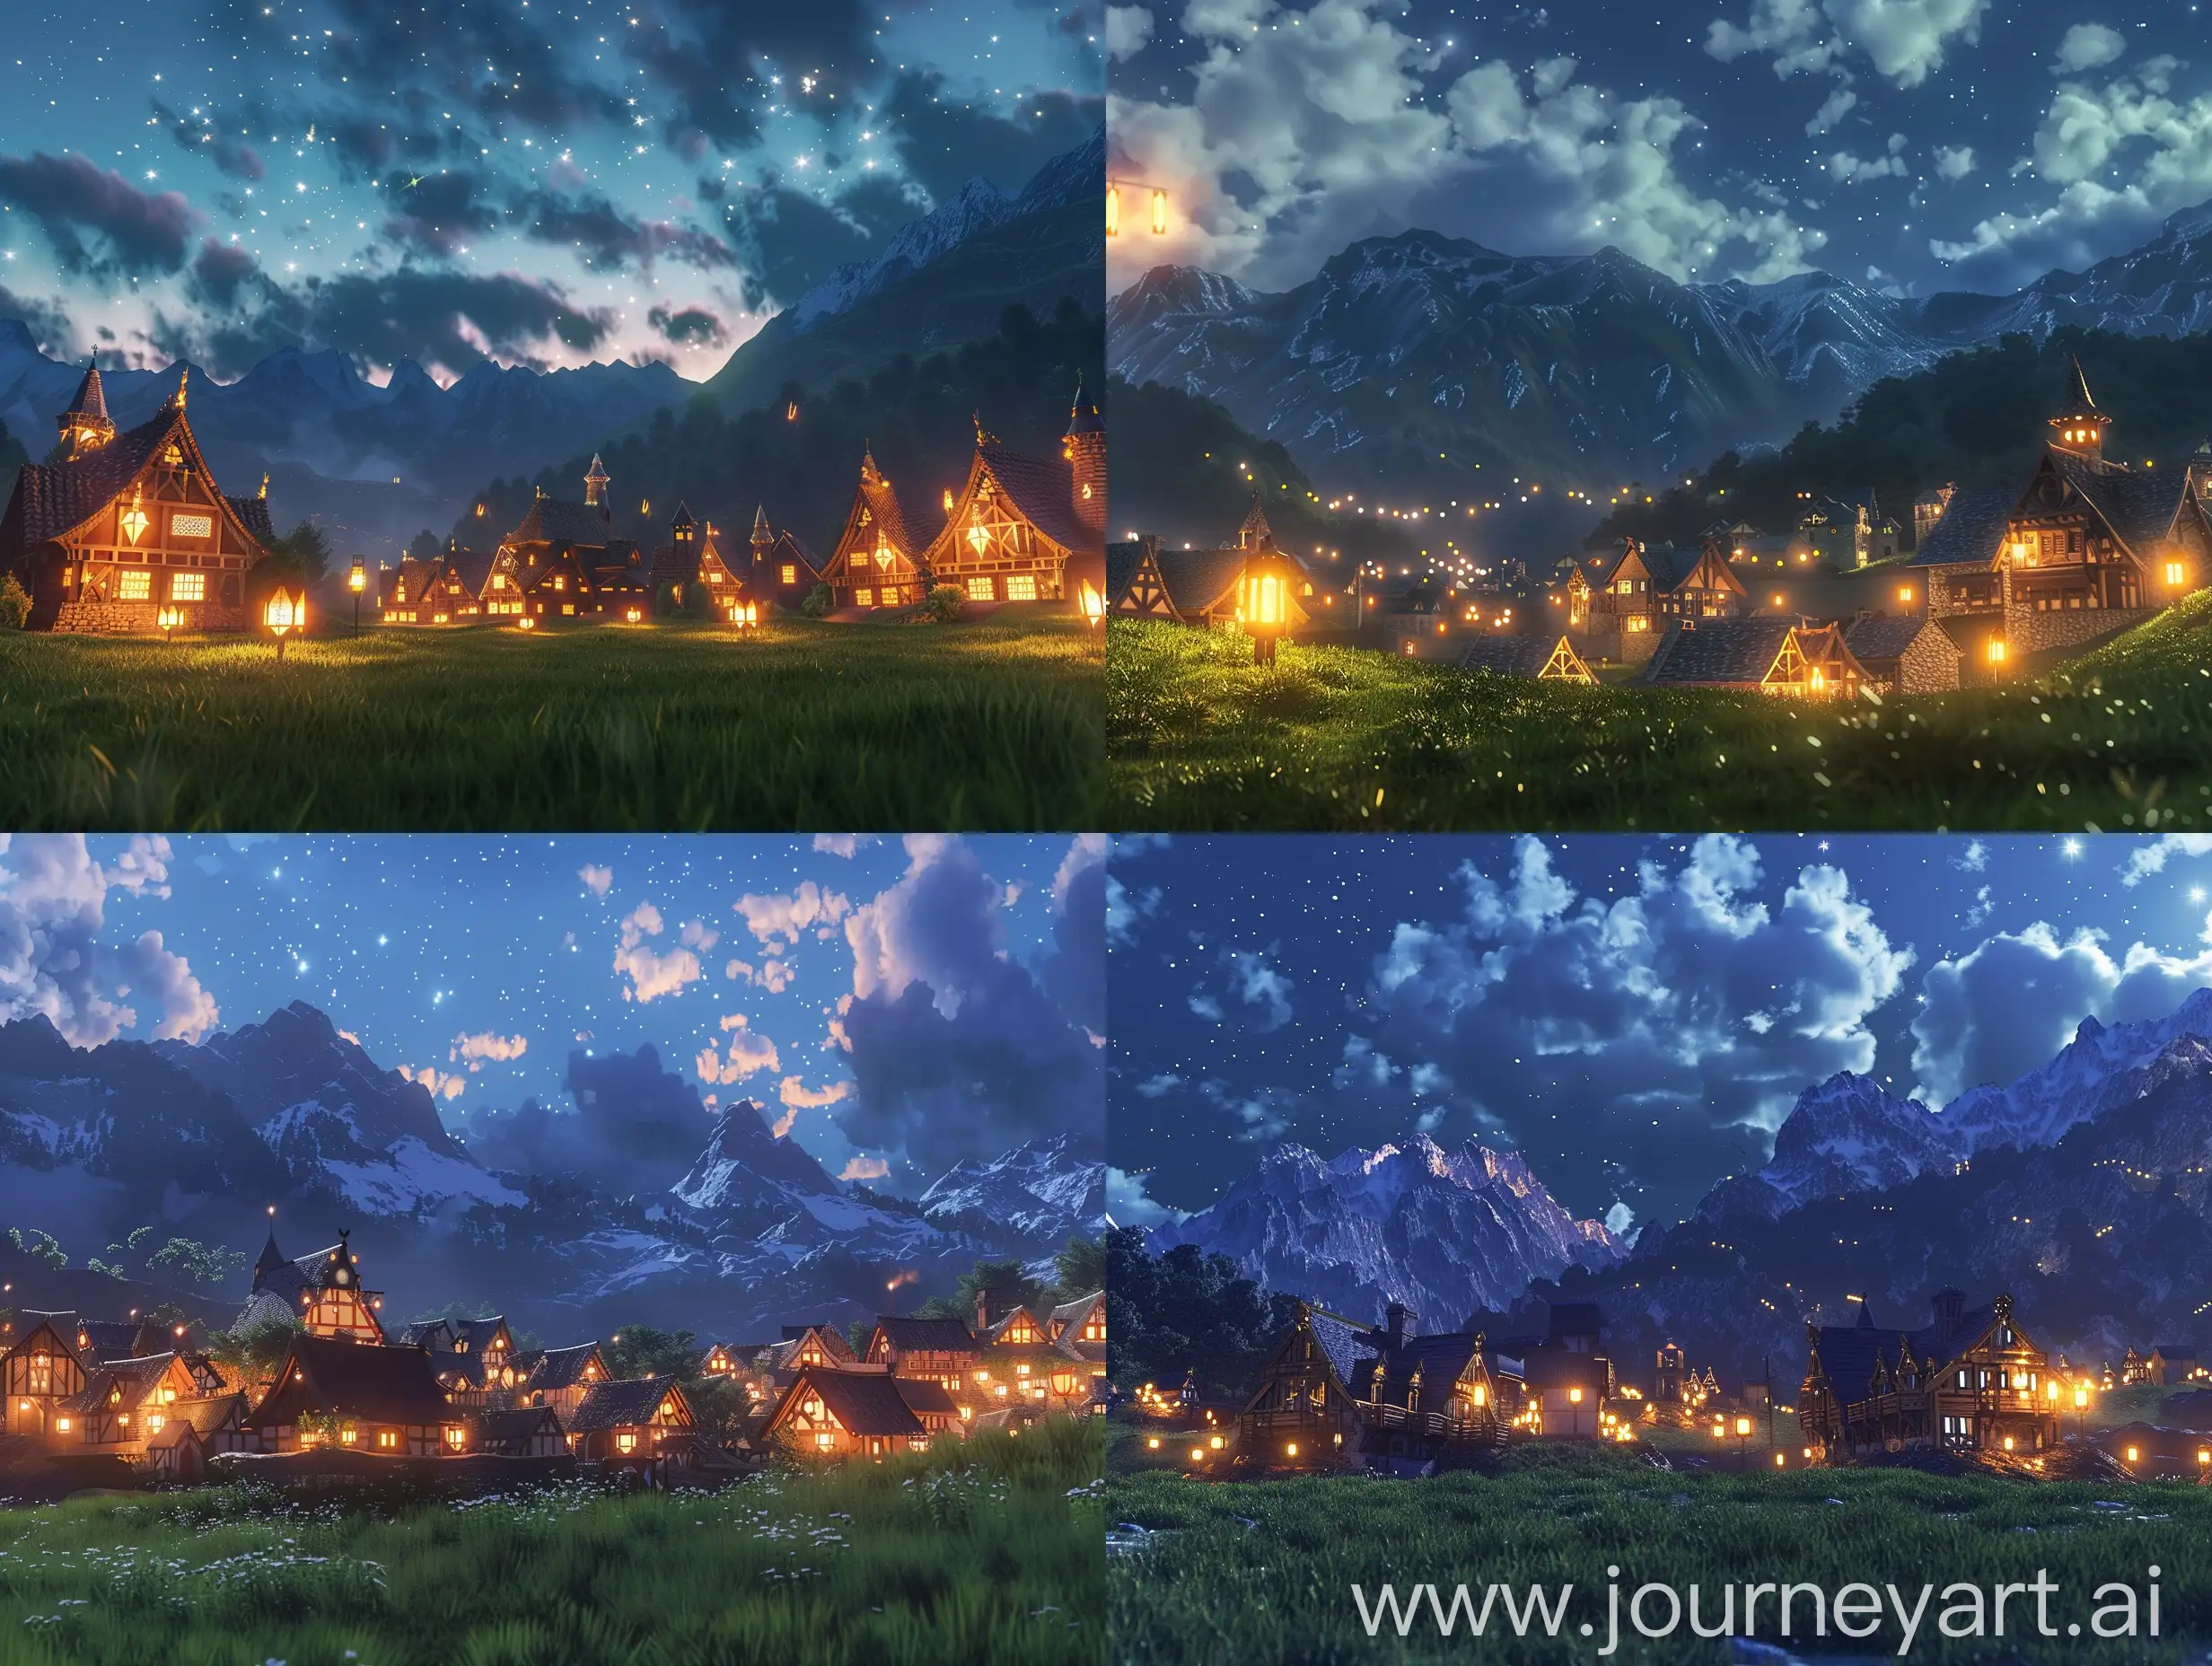 On grassy land with mountains behind it, there is a village lit by lanterns. The houses are built in an old European style, and the village is illuminated in the calm of the night.  The sky is filled with a few clouds, and the night is full of stars.